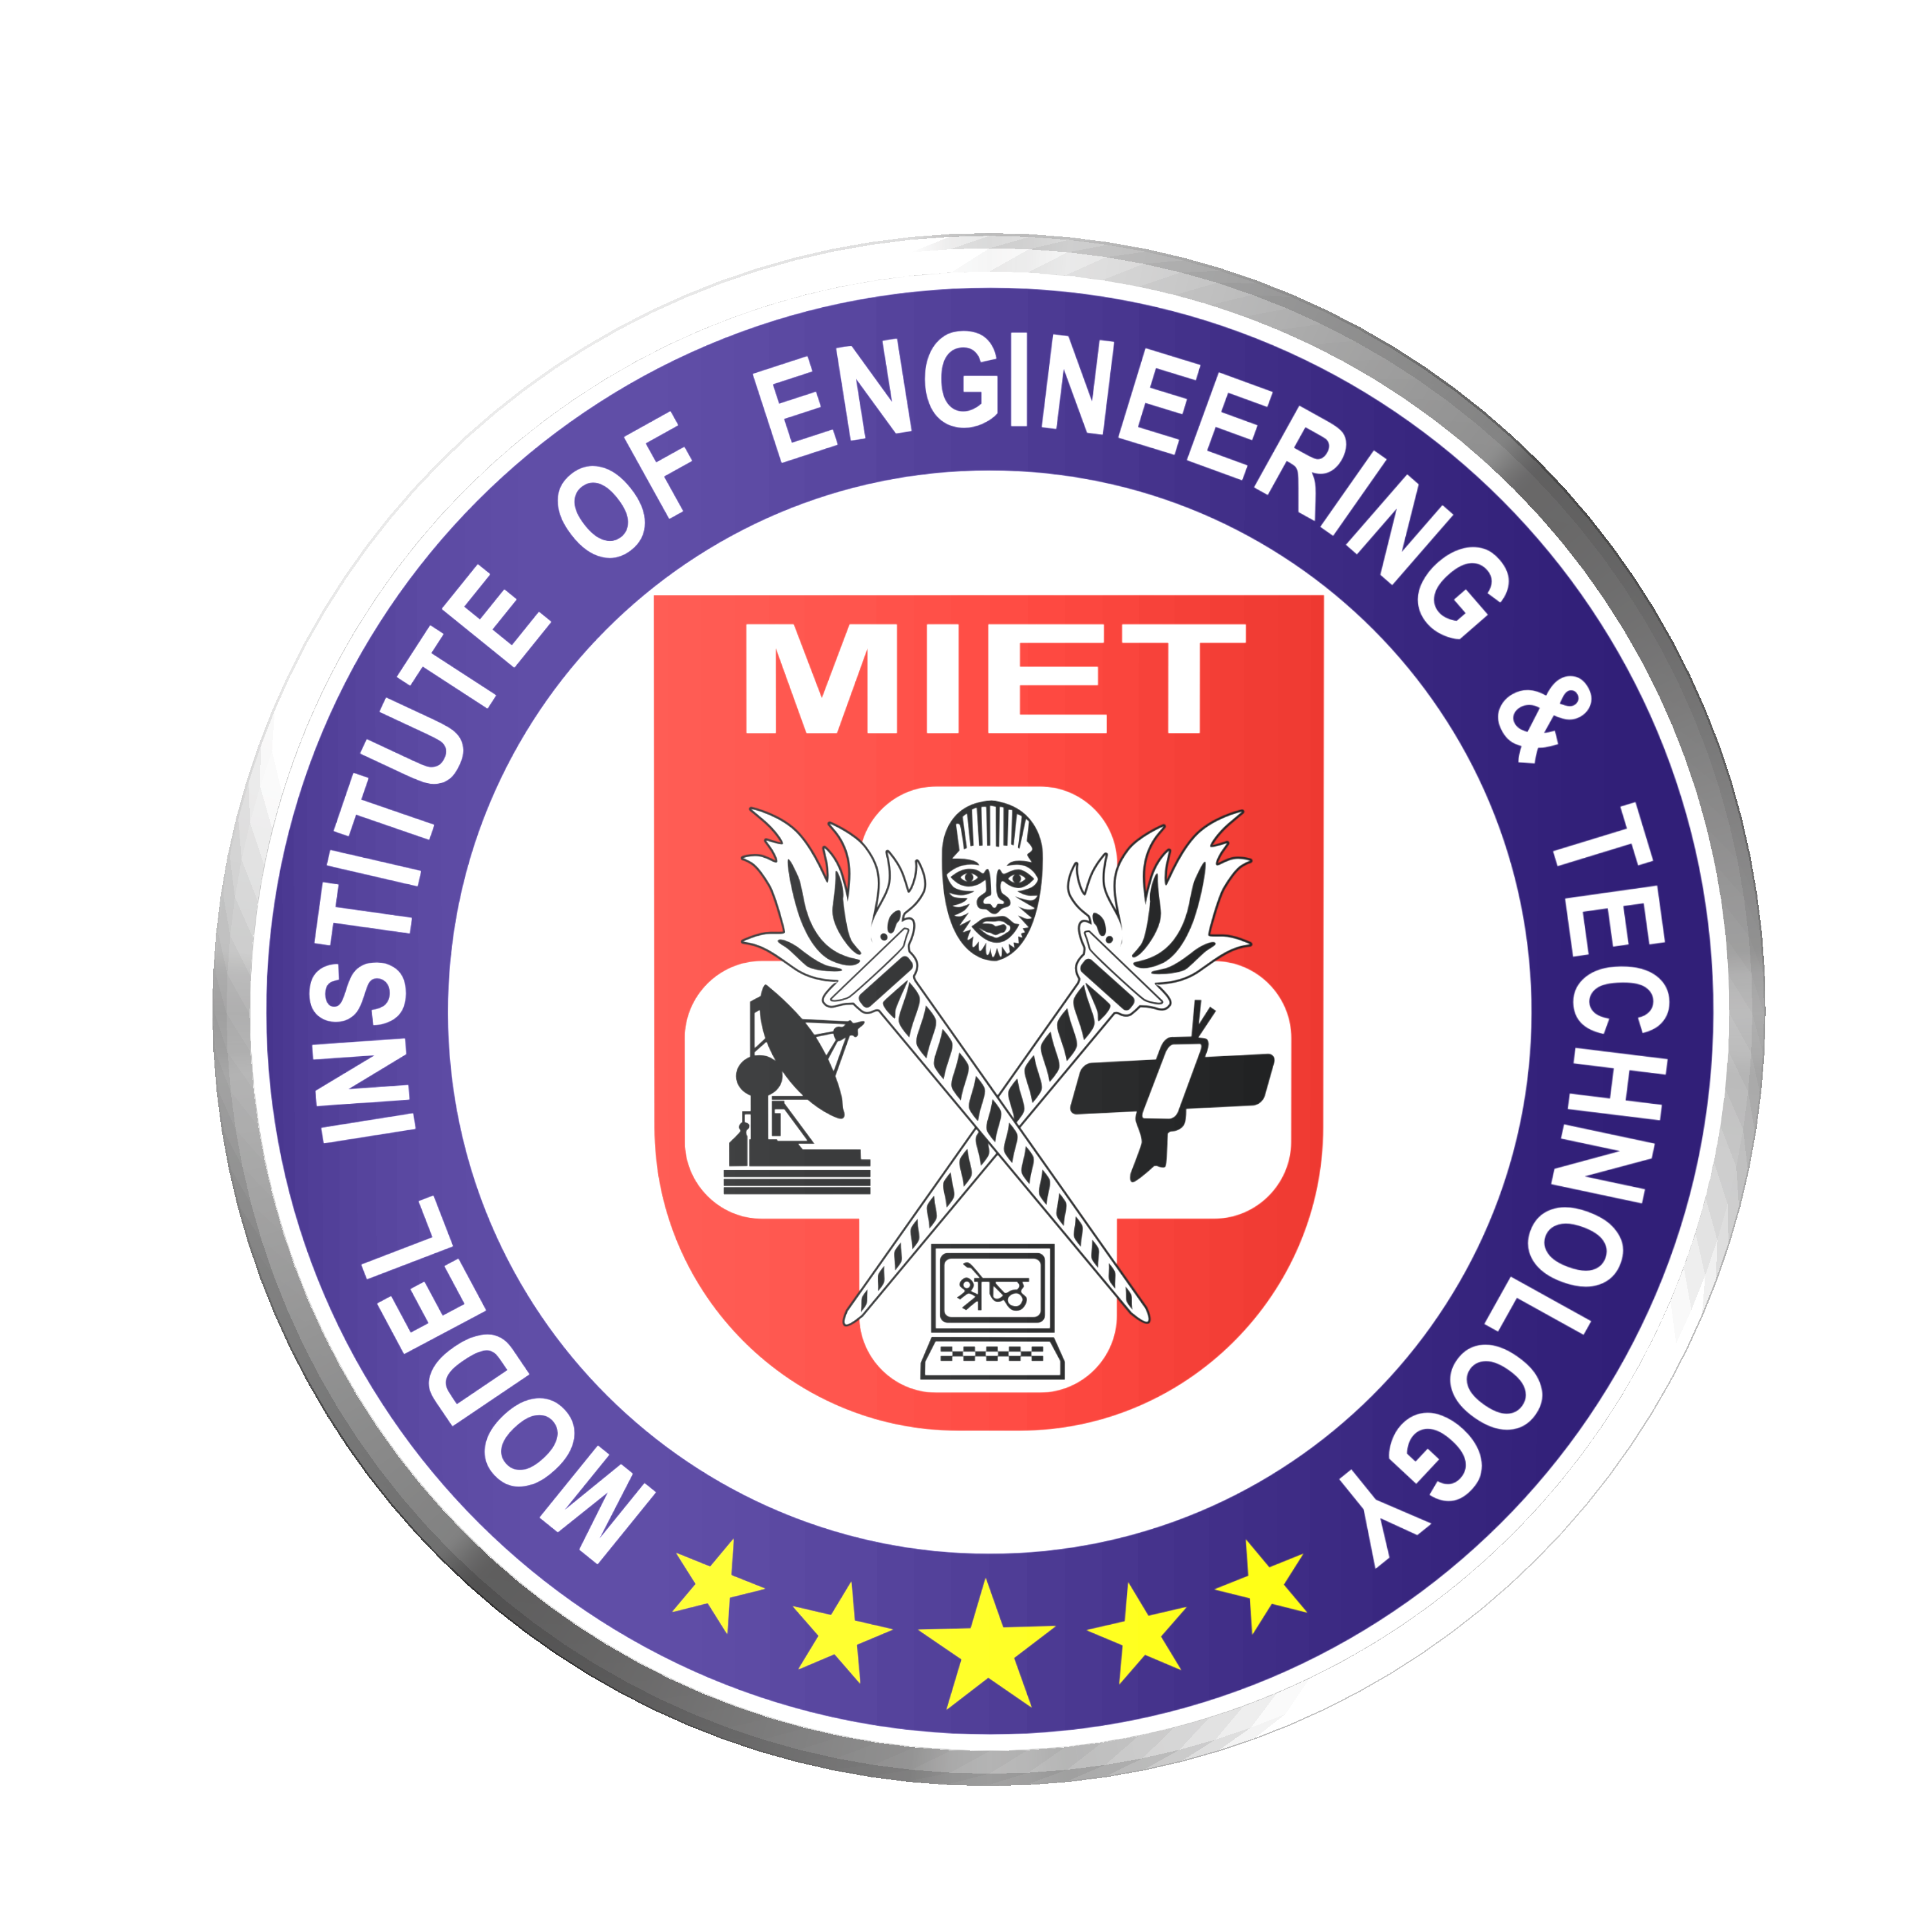 Model Institute of Engineering and Technology (MIET), Jammu